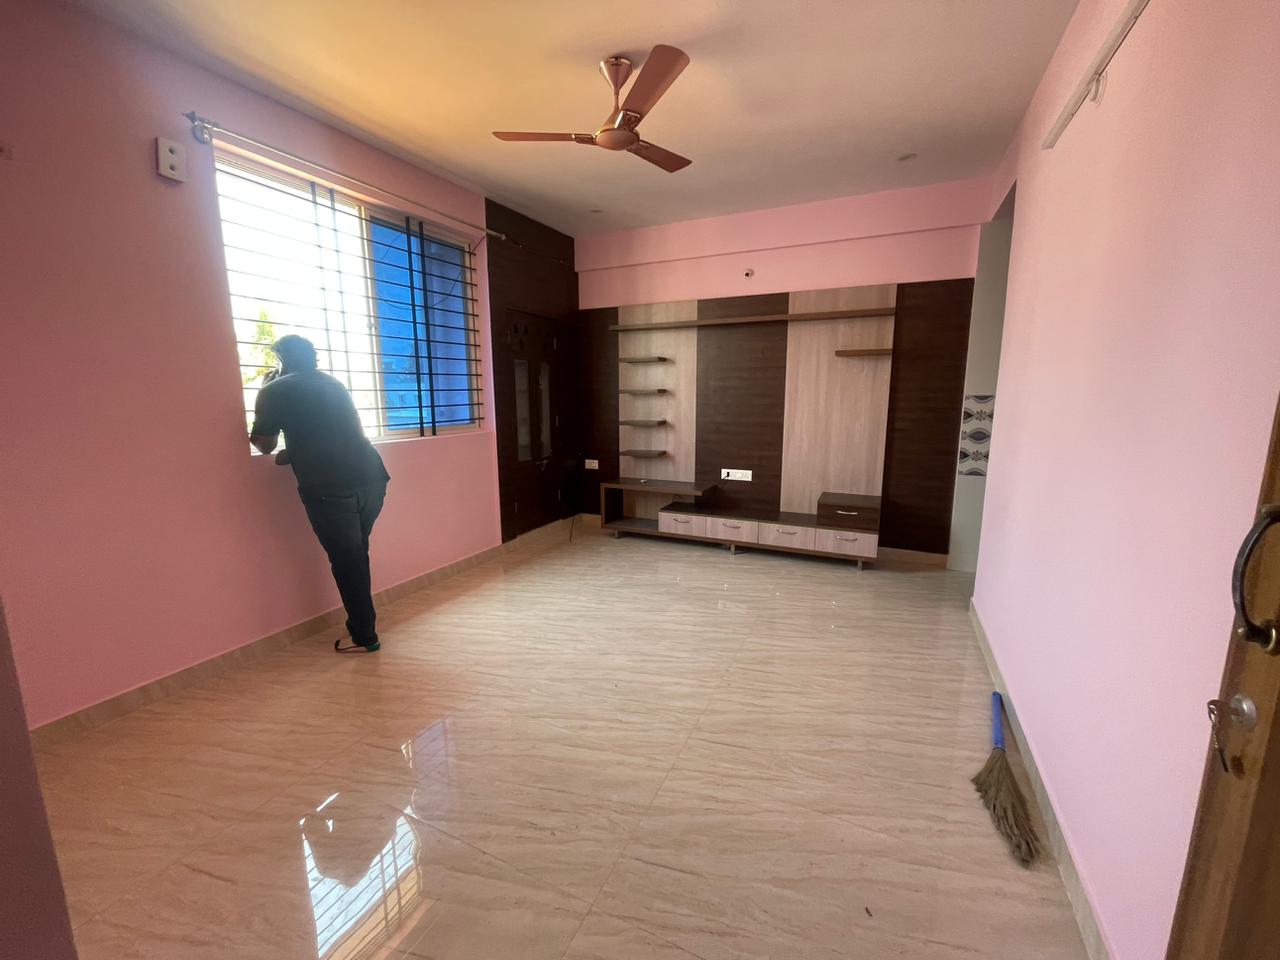 3 BHK Independent House for Lease Only at JAML2 - 2840 in Babusapalya